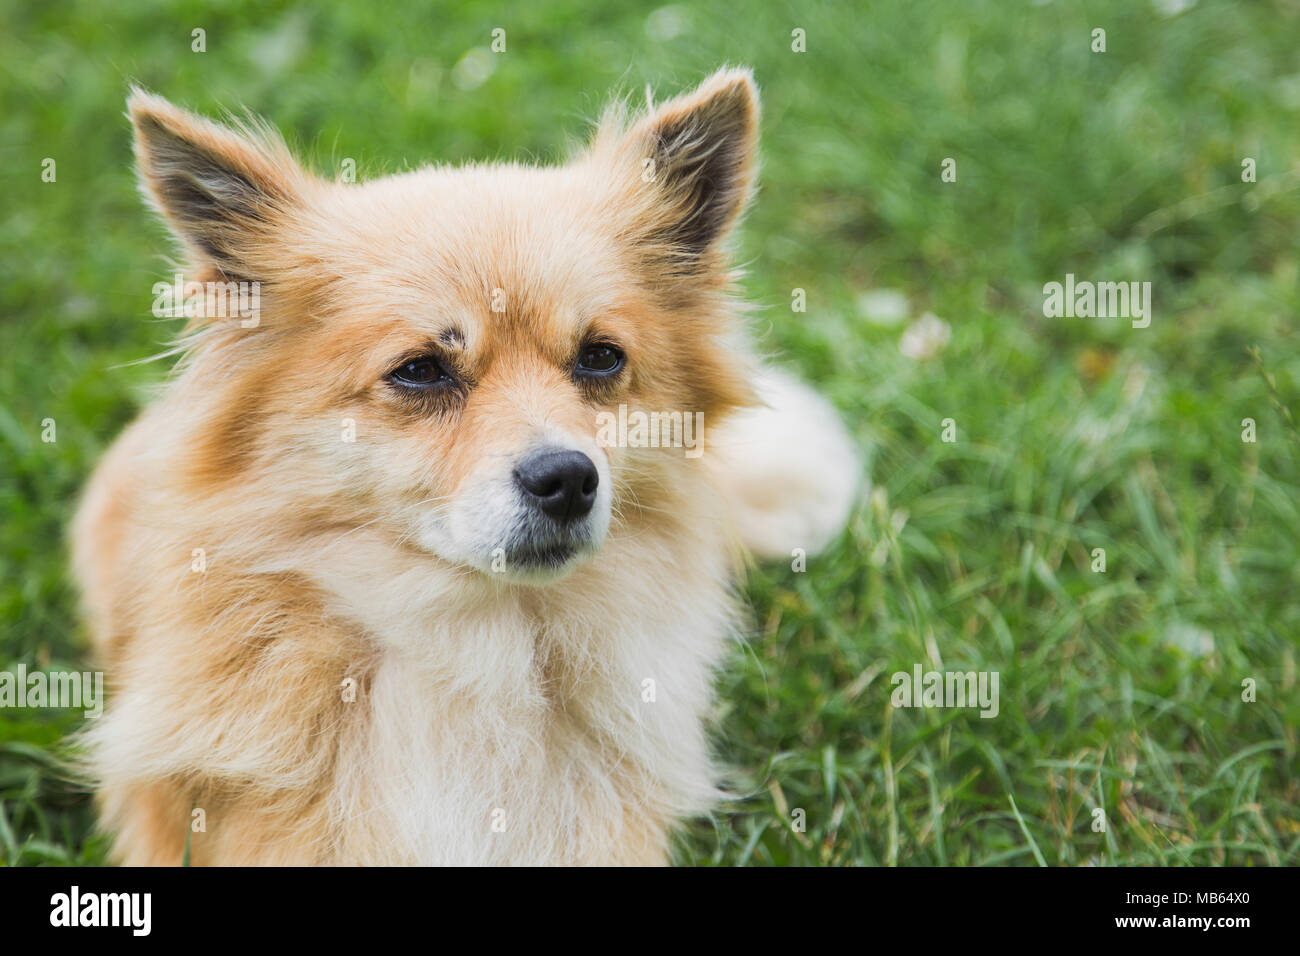 Closeup portrait of cute face of small yellow dog laying on green grass outdoors calmly. Horizontal color photography. Stock Photo